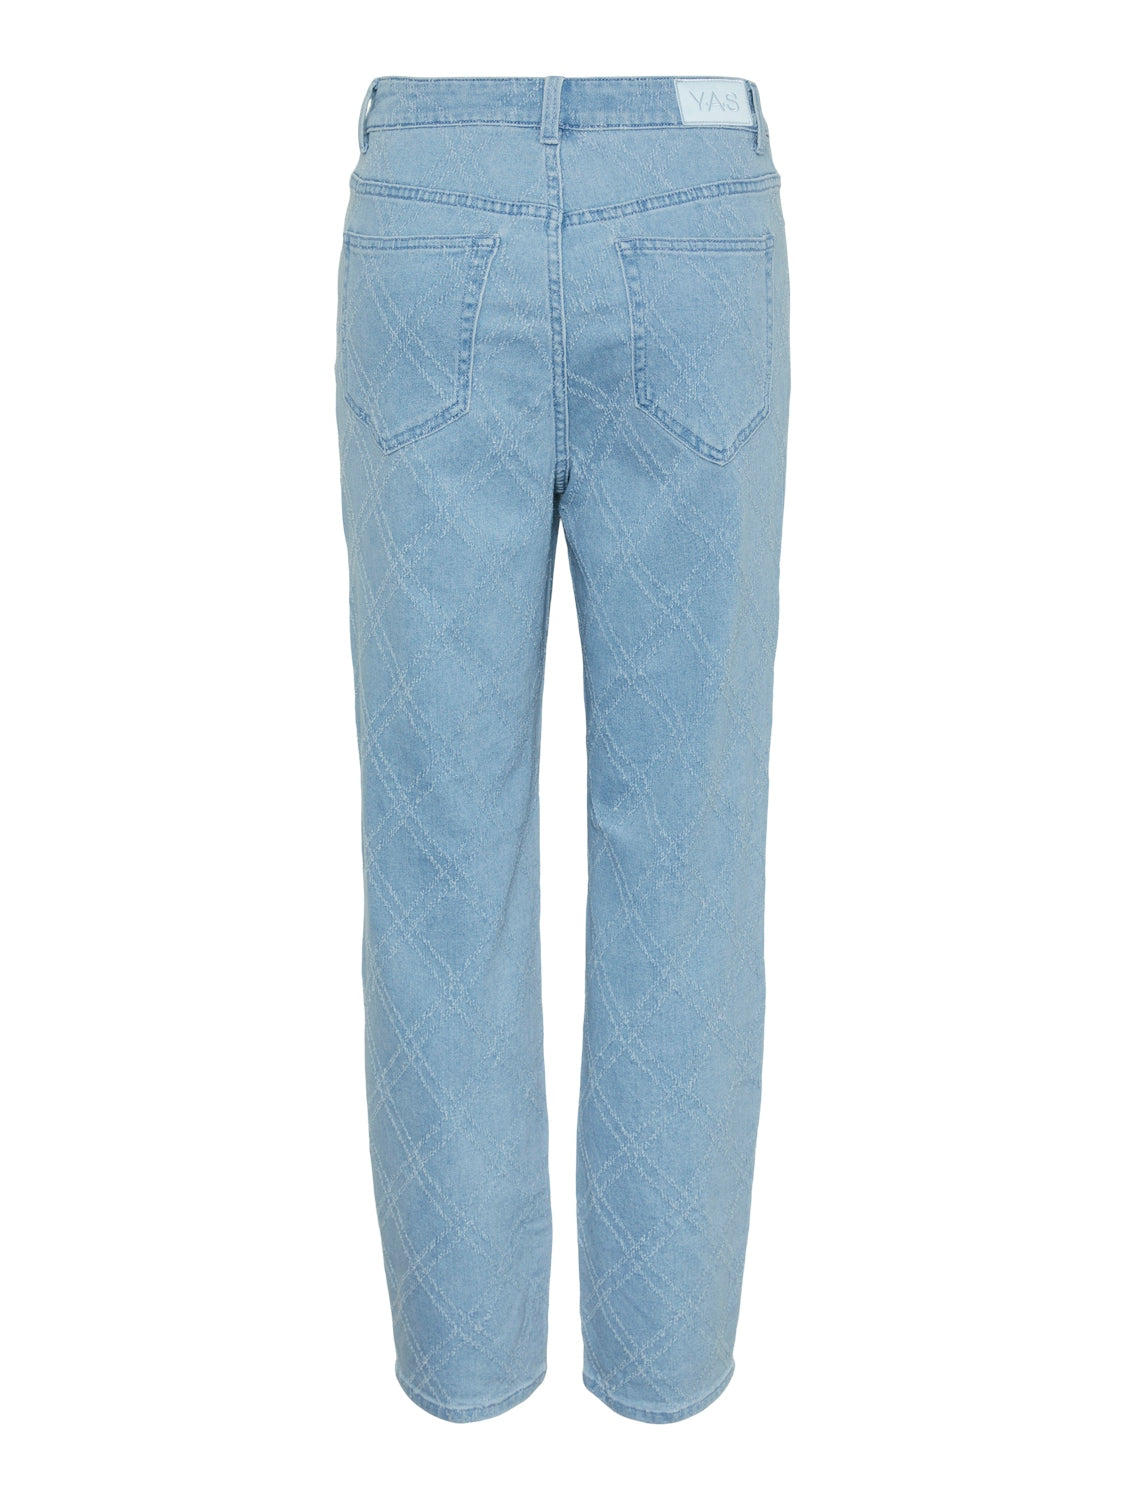 YAS PANE HMW STRAIGHT ANKLE JEANS